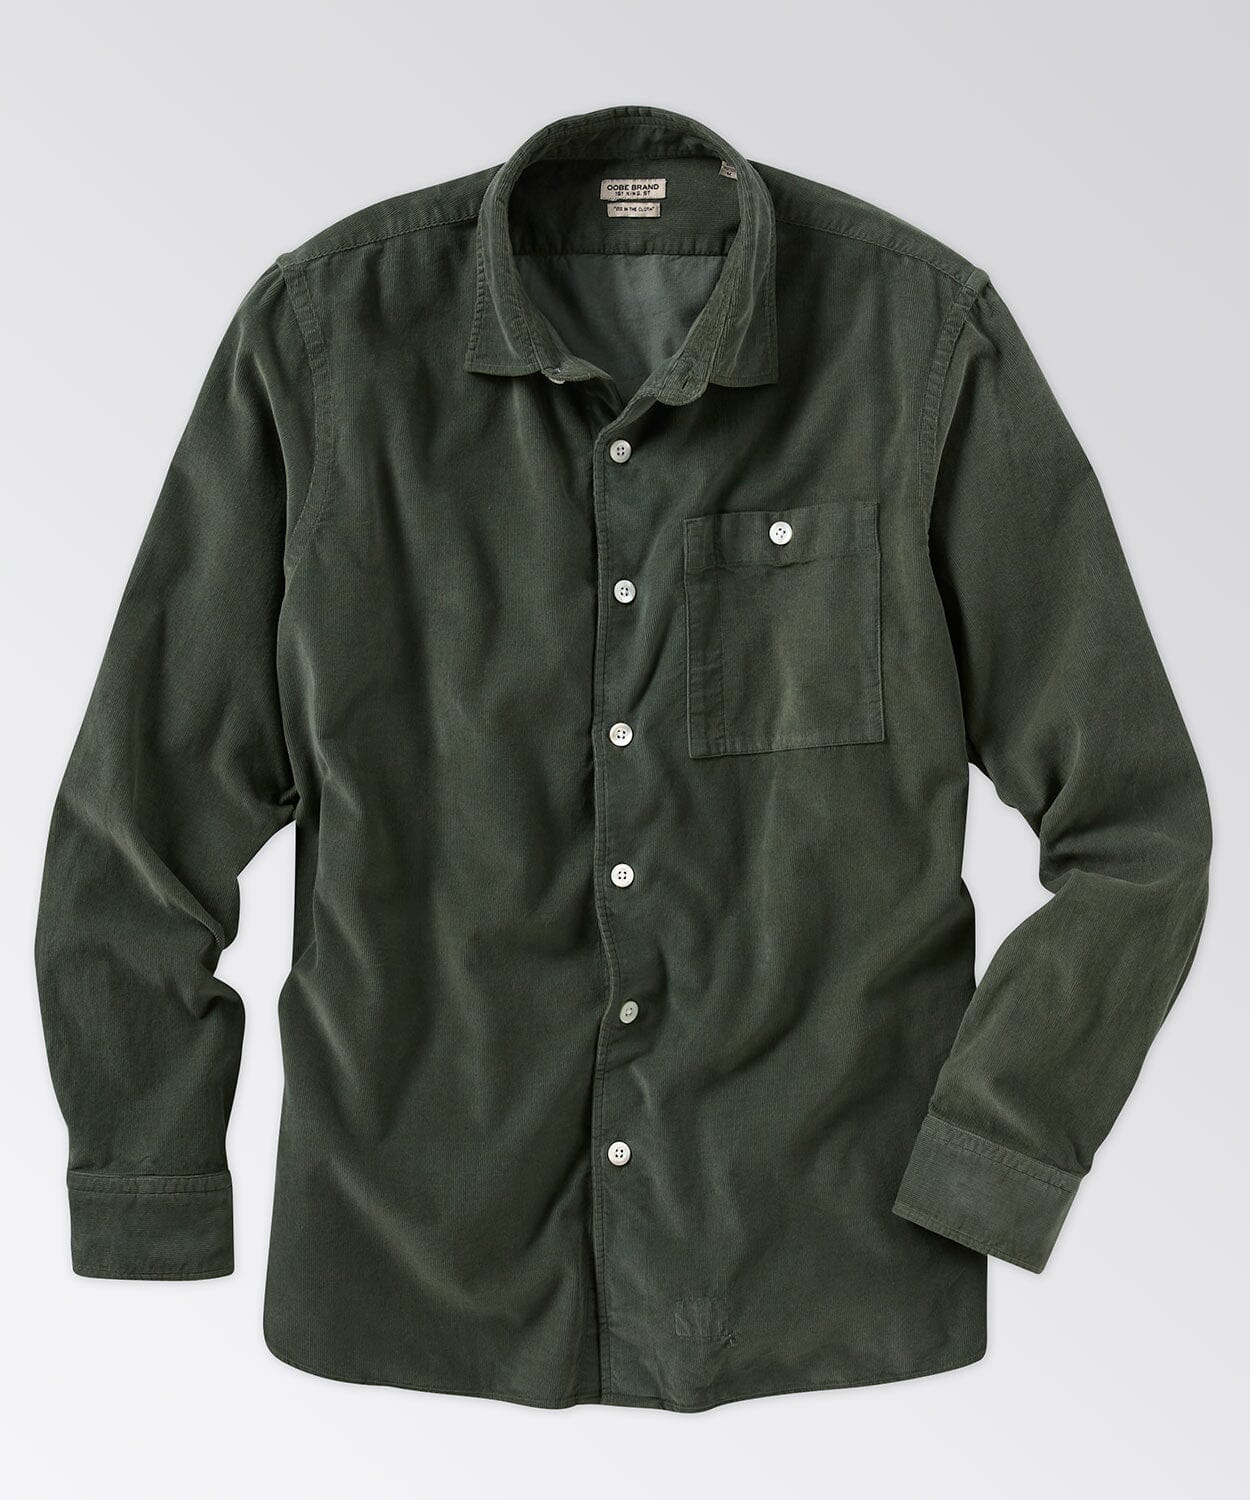 Aalto Corduroy Shirt Button Downs OOBE BRAND Ivy S 